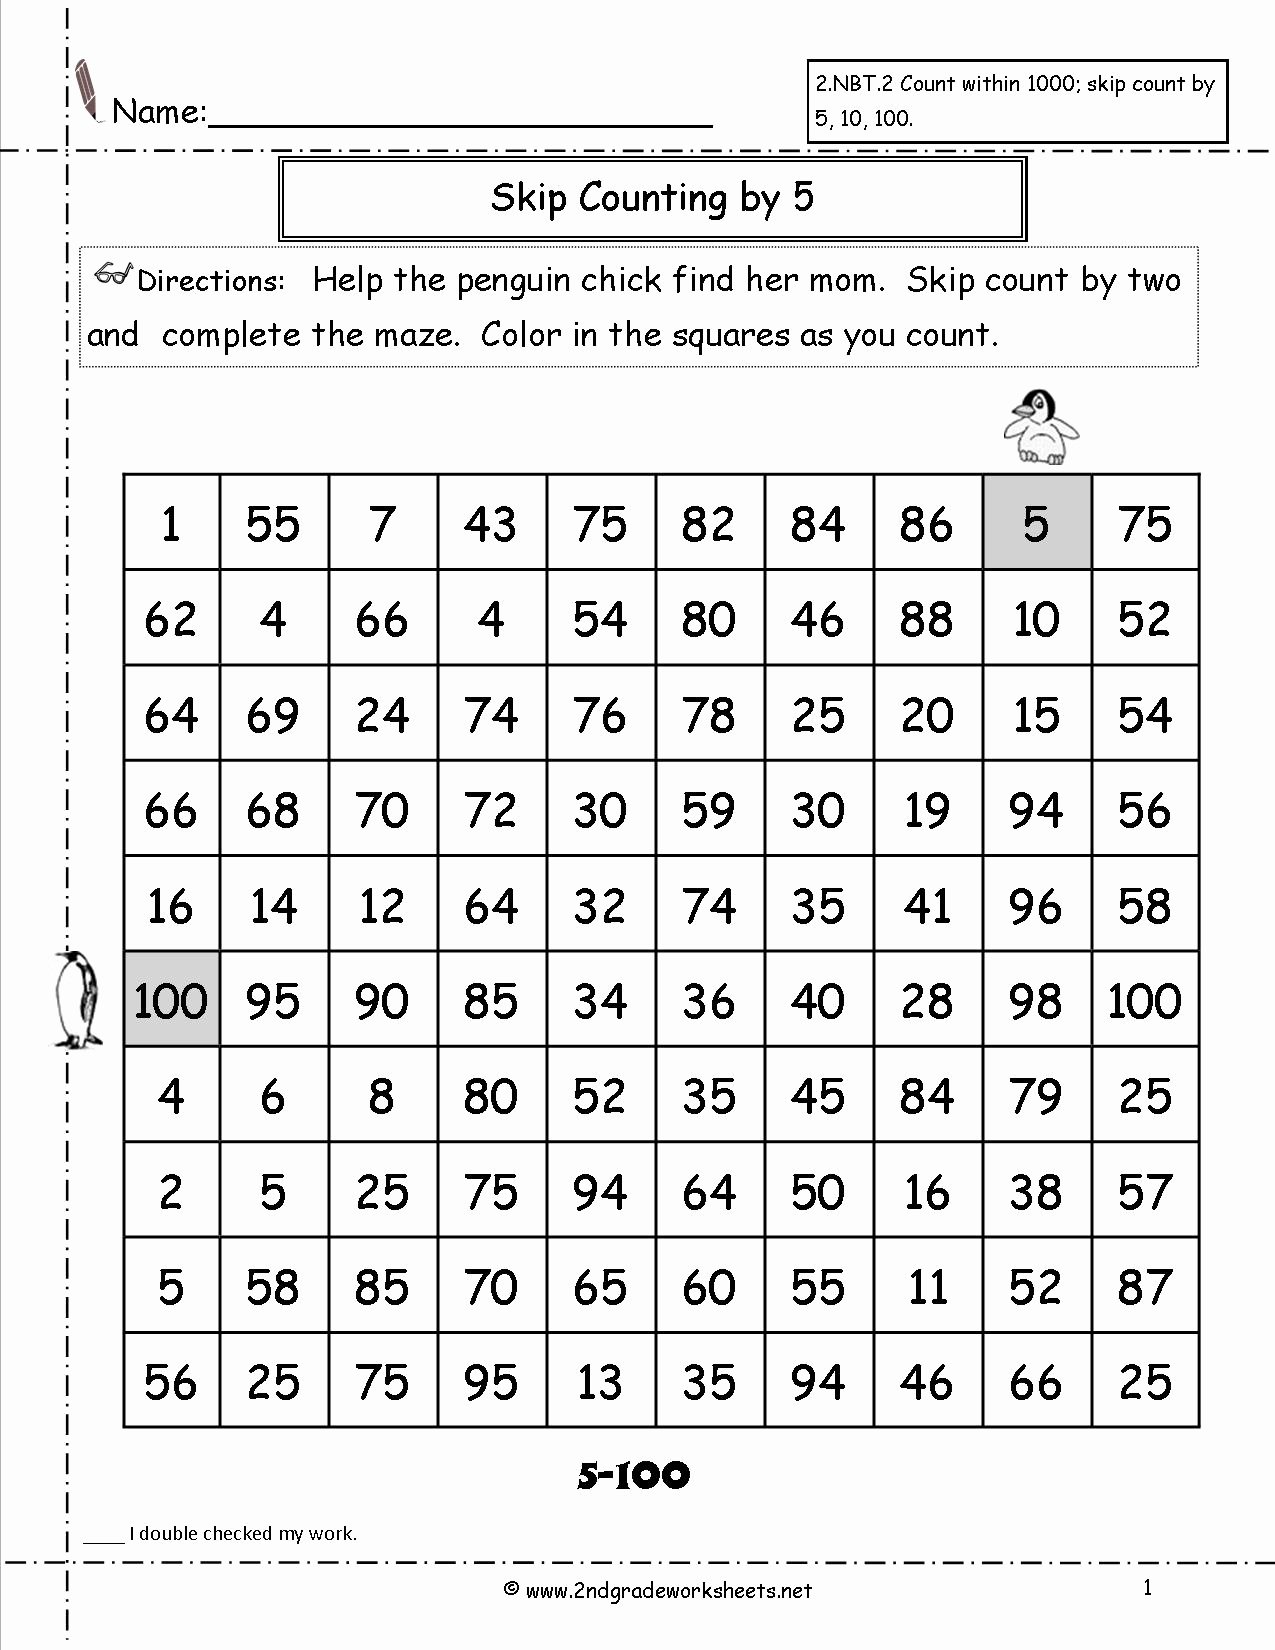 Counting by 5s Worksheet Awesome 14 Best Of 1 to 100 Worksheets Counting by 5s